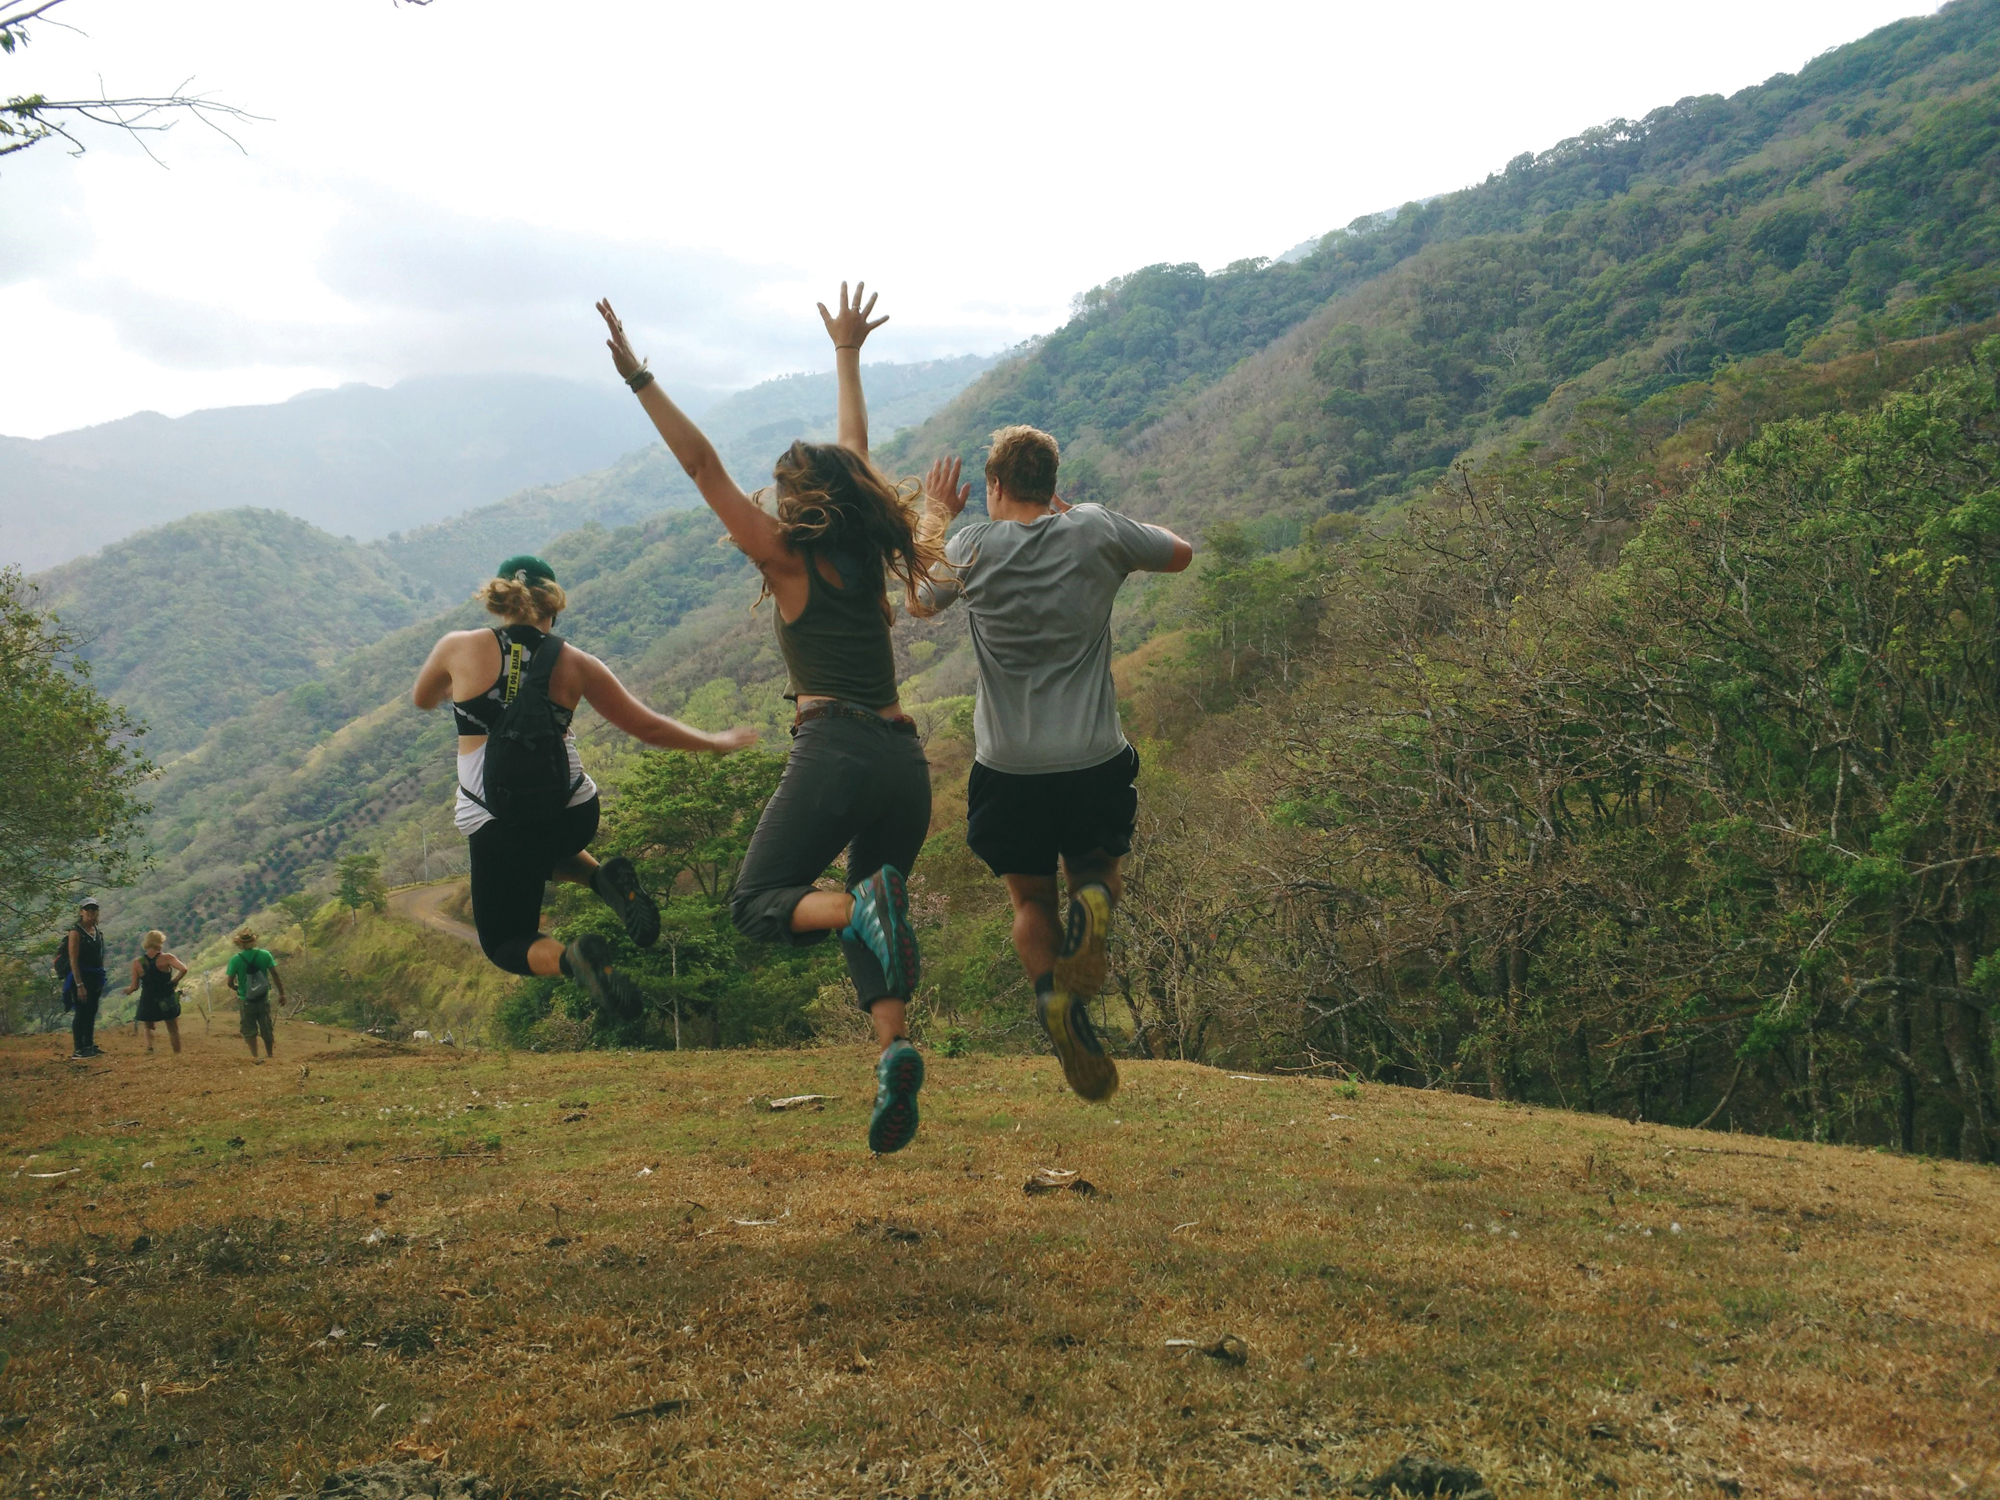 A group of students run and jump across the green hills of a Costa Rican countryside.